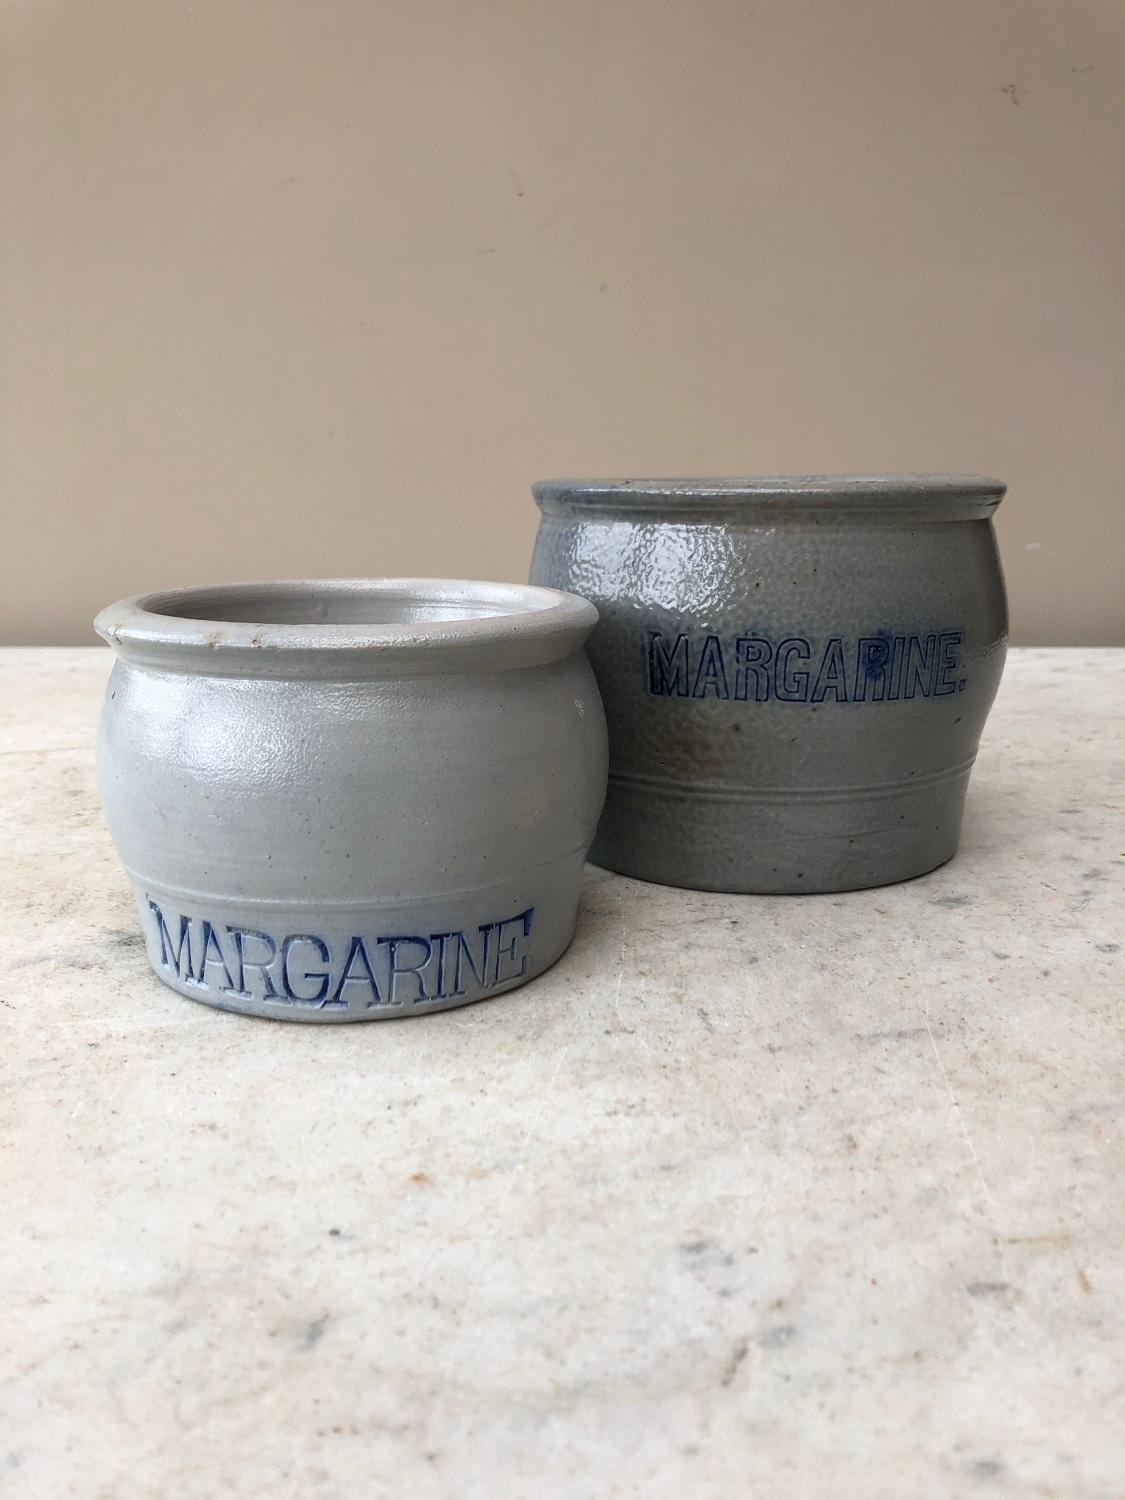 Two Early 20thC Margarine Pots - For Sale Individually